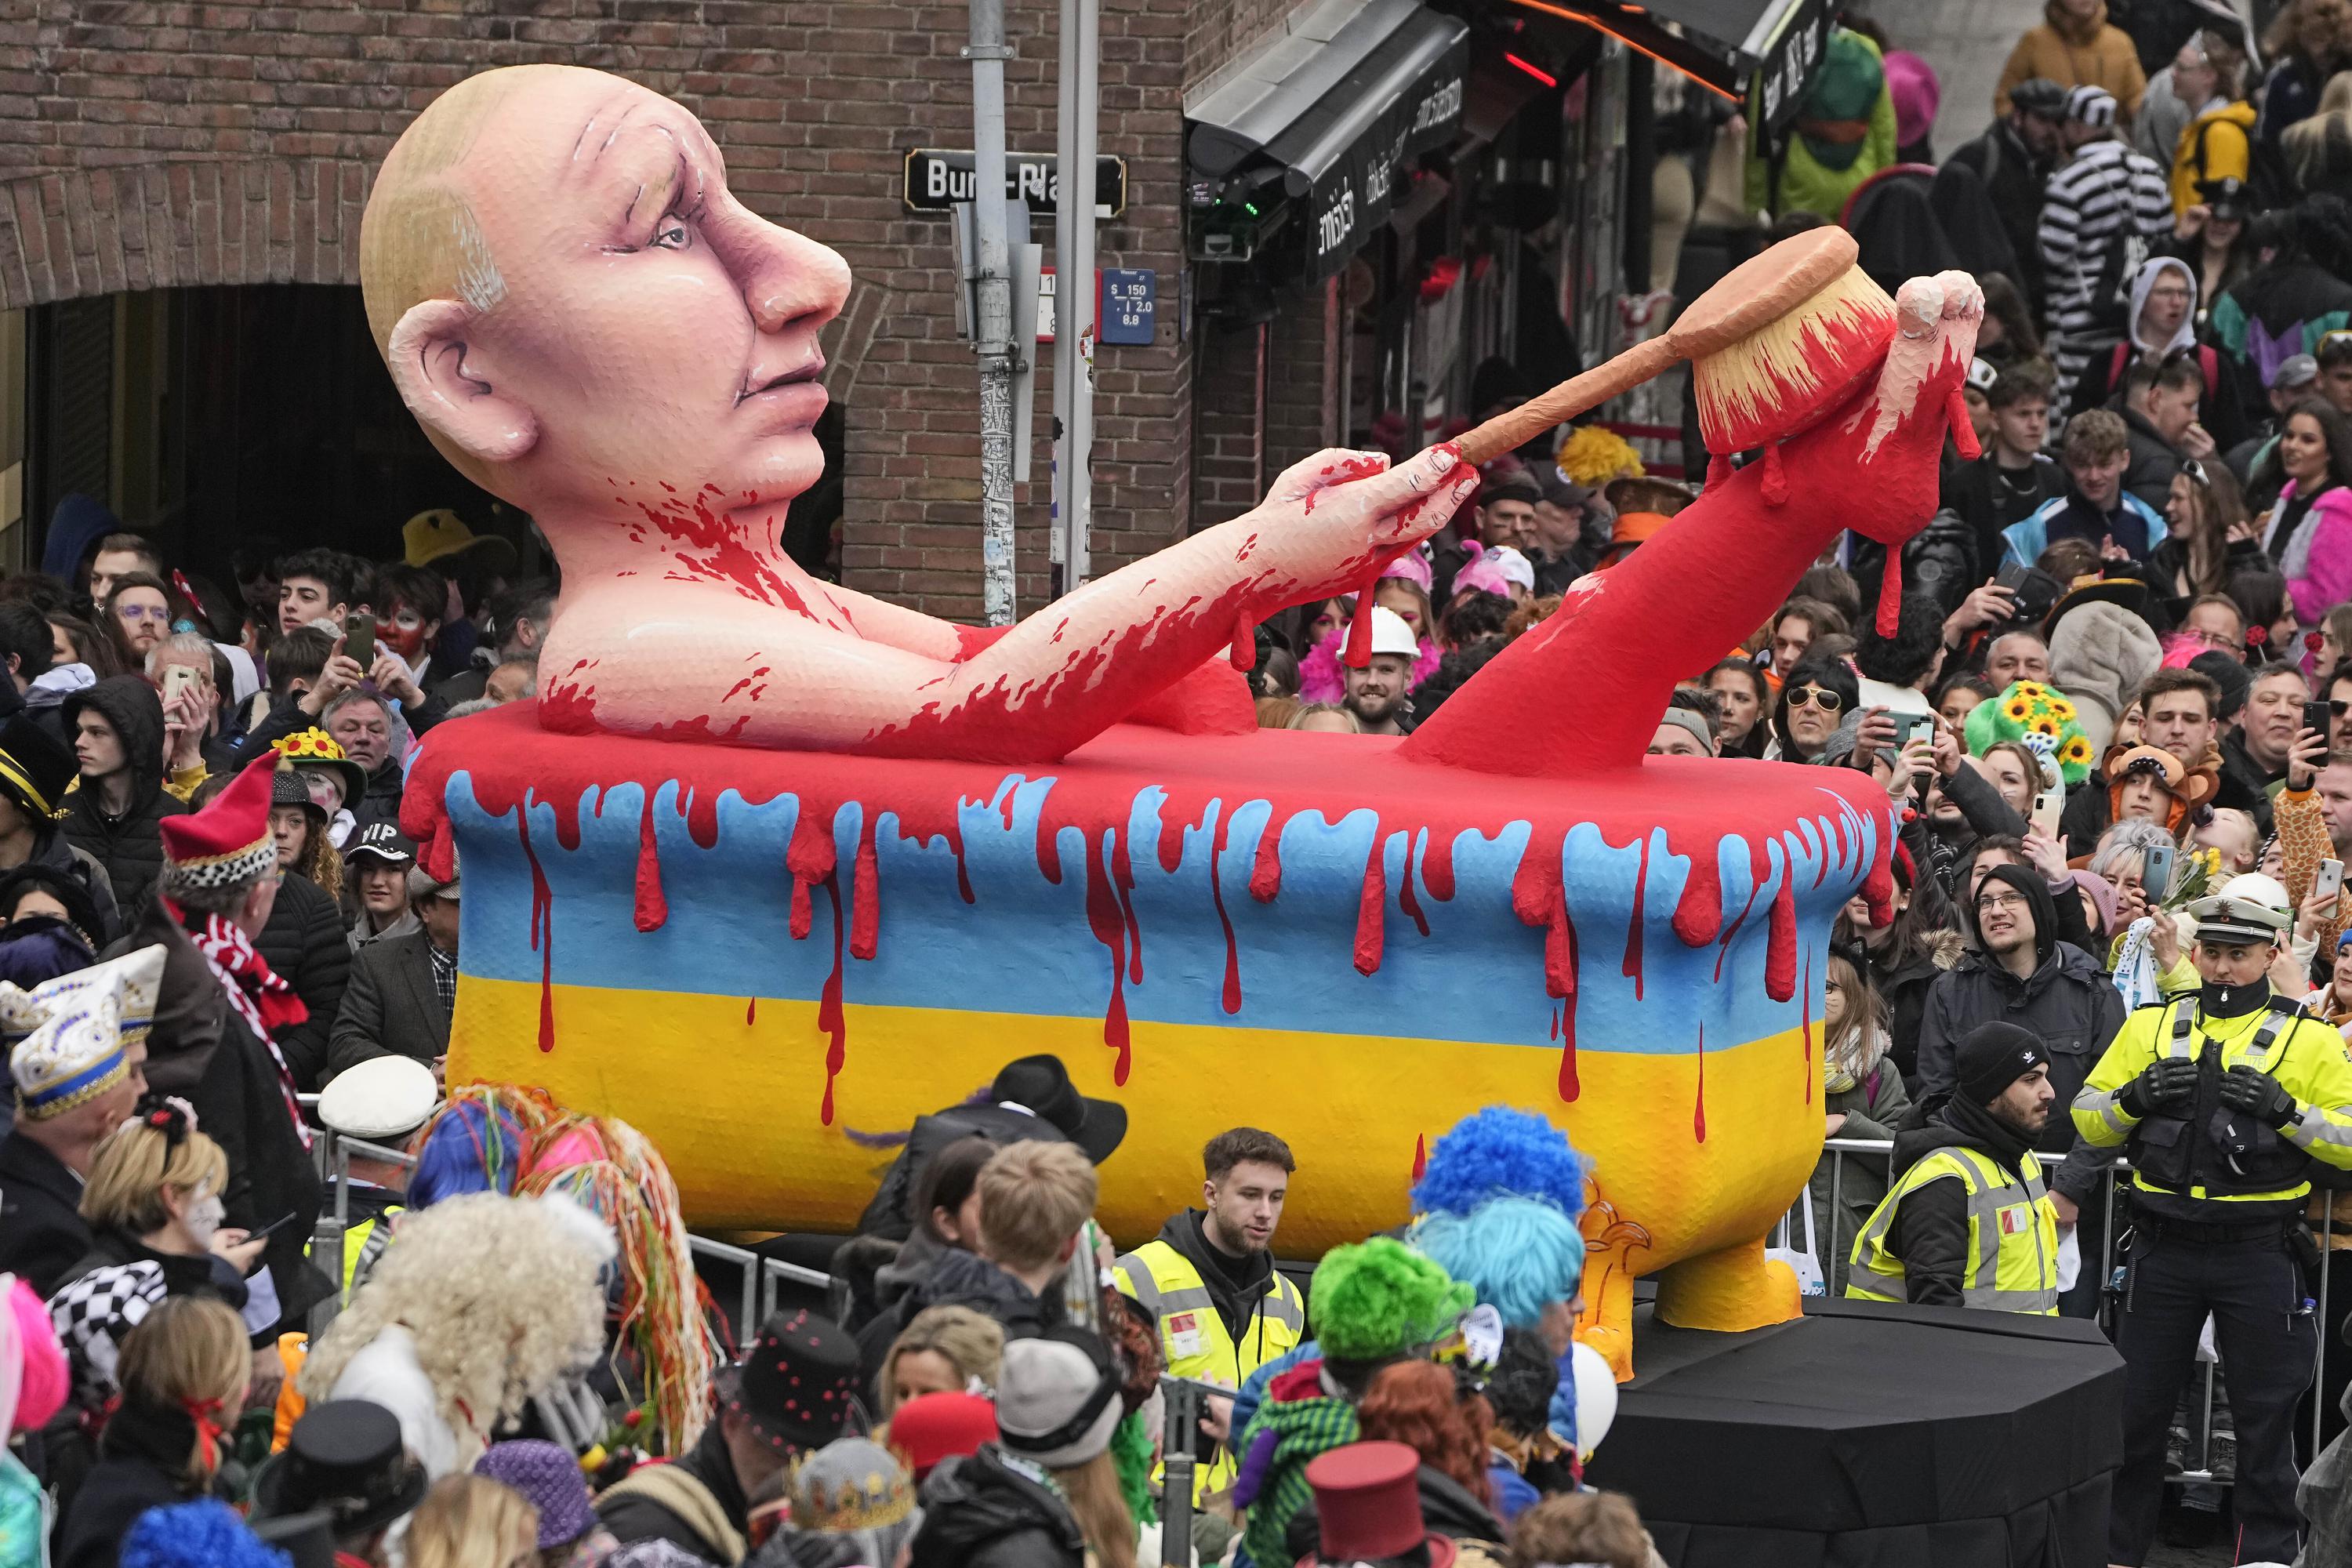 Carnival festivals around the world: Join the parades and parties in 2020